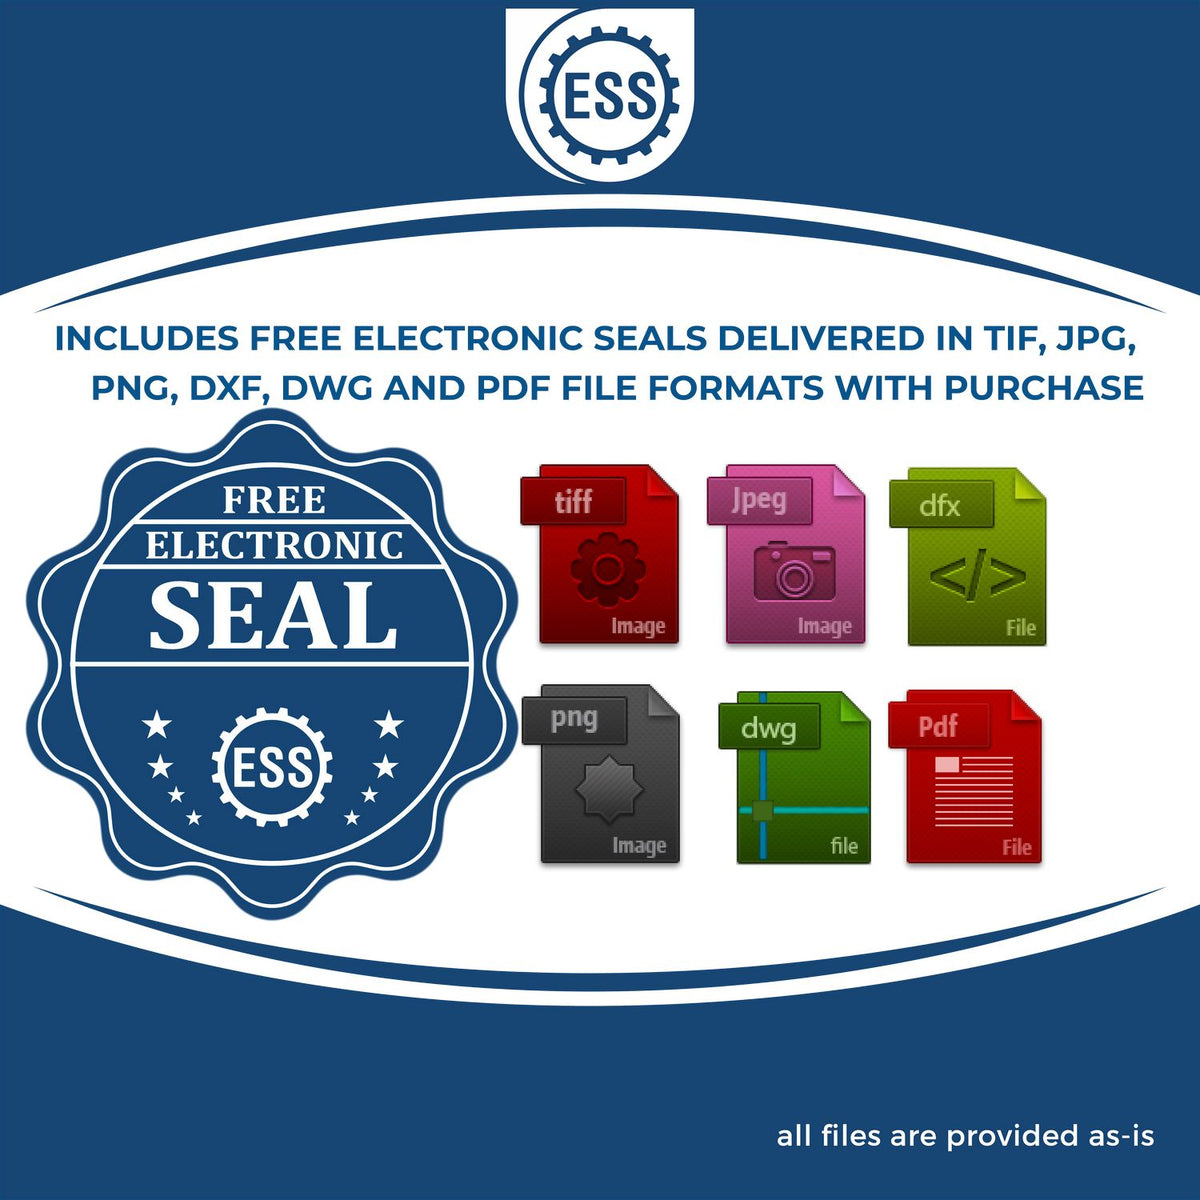 An infographic for the free electronic seal for the State of Texas Extended Long Reach Geologist Seal illustrating the different file type icons such as DXF, DWG, TIF, JPG and PNG.